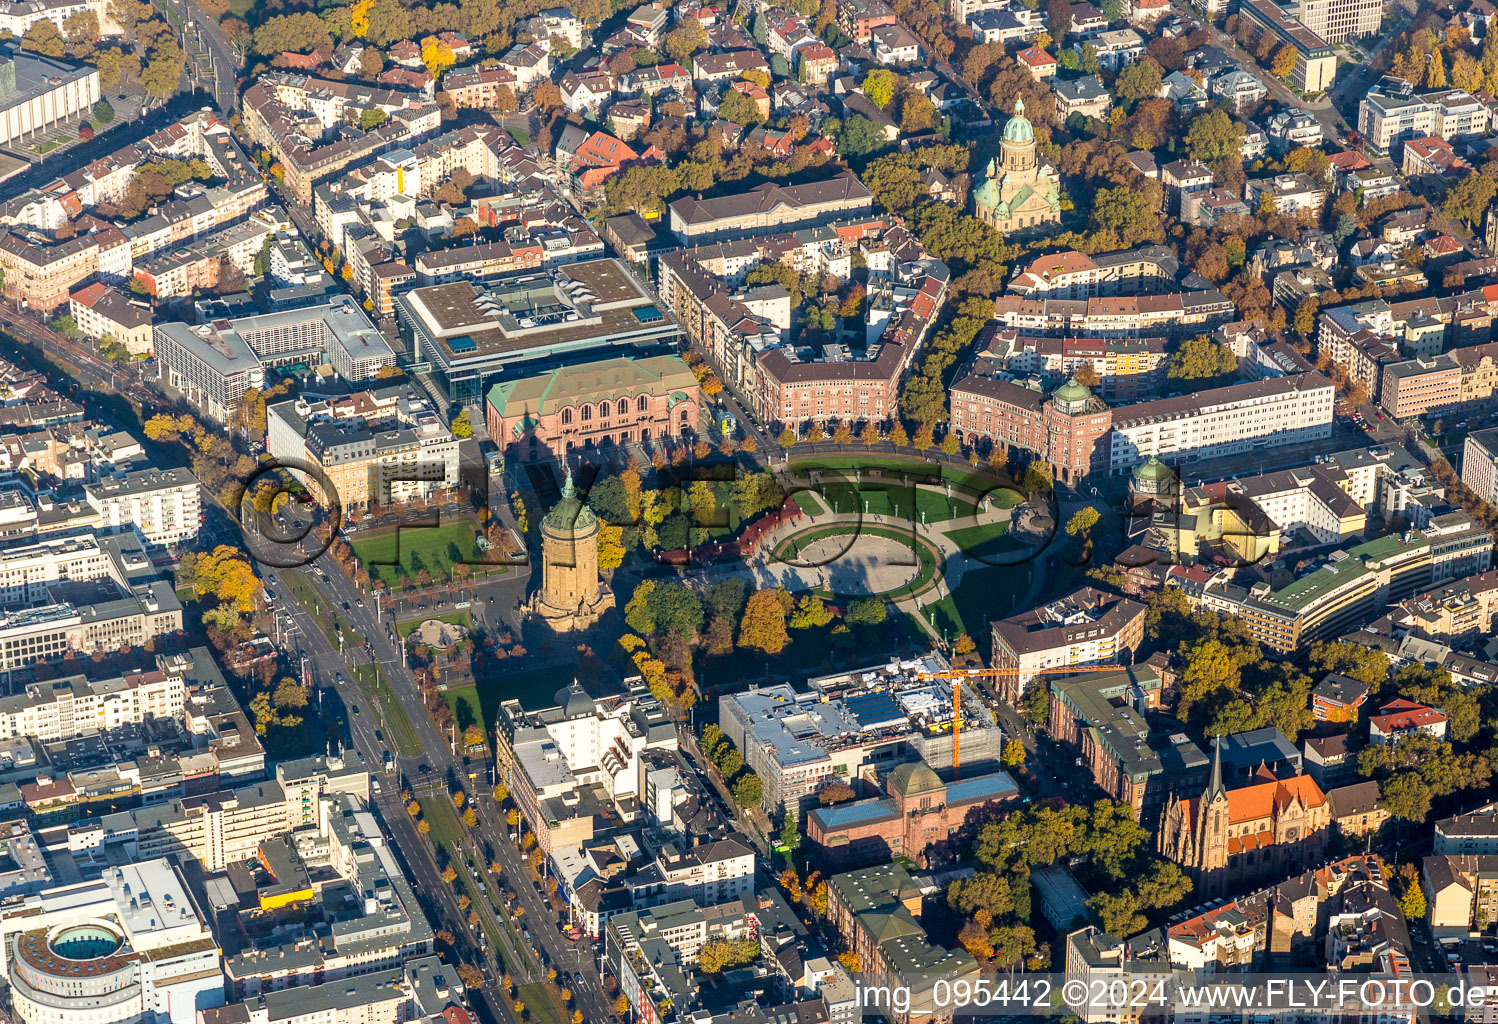 Wasserturm, Artgallery, Roengarden and Christ-church around Friedrichs-place in the inner city center in Mannheim in the state Baden-Wurttemberg, Germany